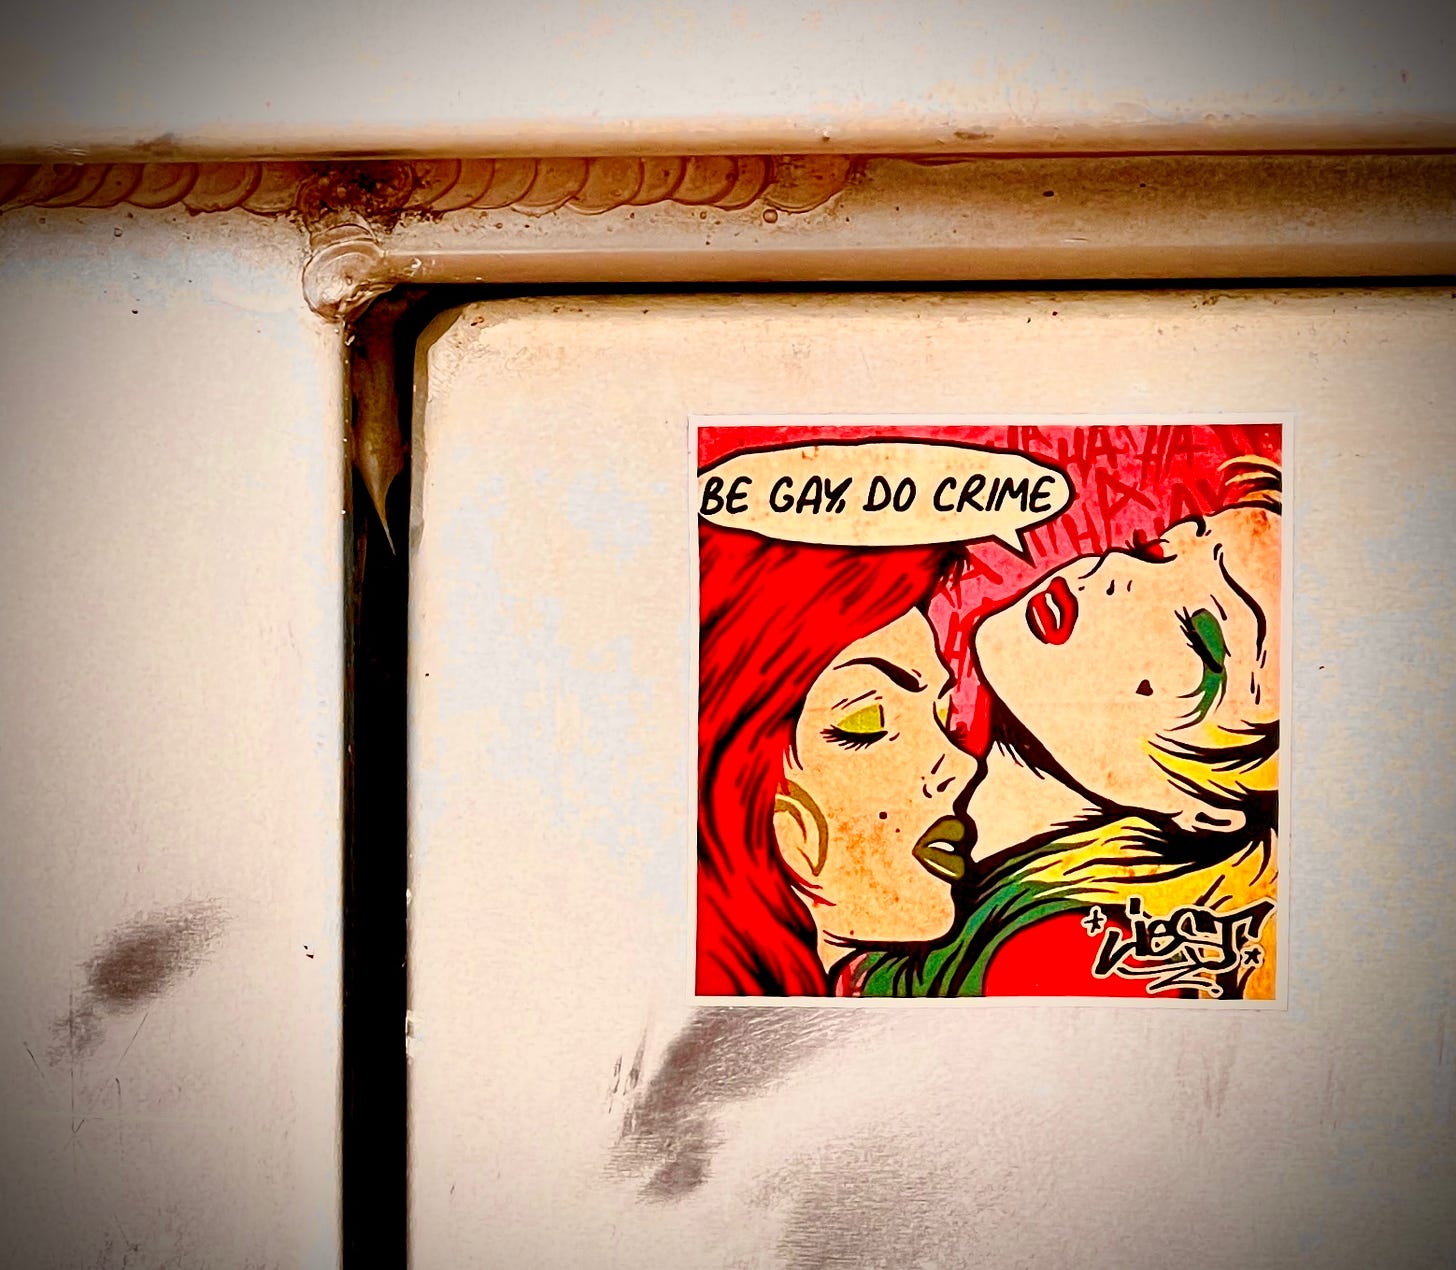 Colorful sticker on an indistinct gray metal background showing two passionate woman with bold lipstick and eye shadow, and dyed hair, with their eyes closed looking and a text bubble showing one of them “Be gay, do crime”.